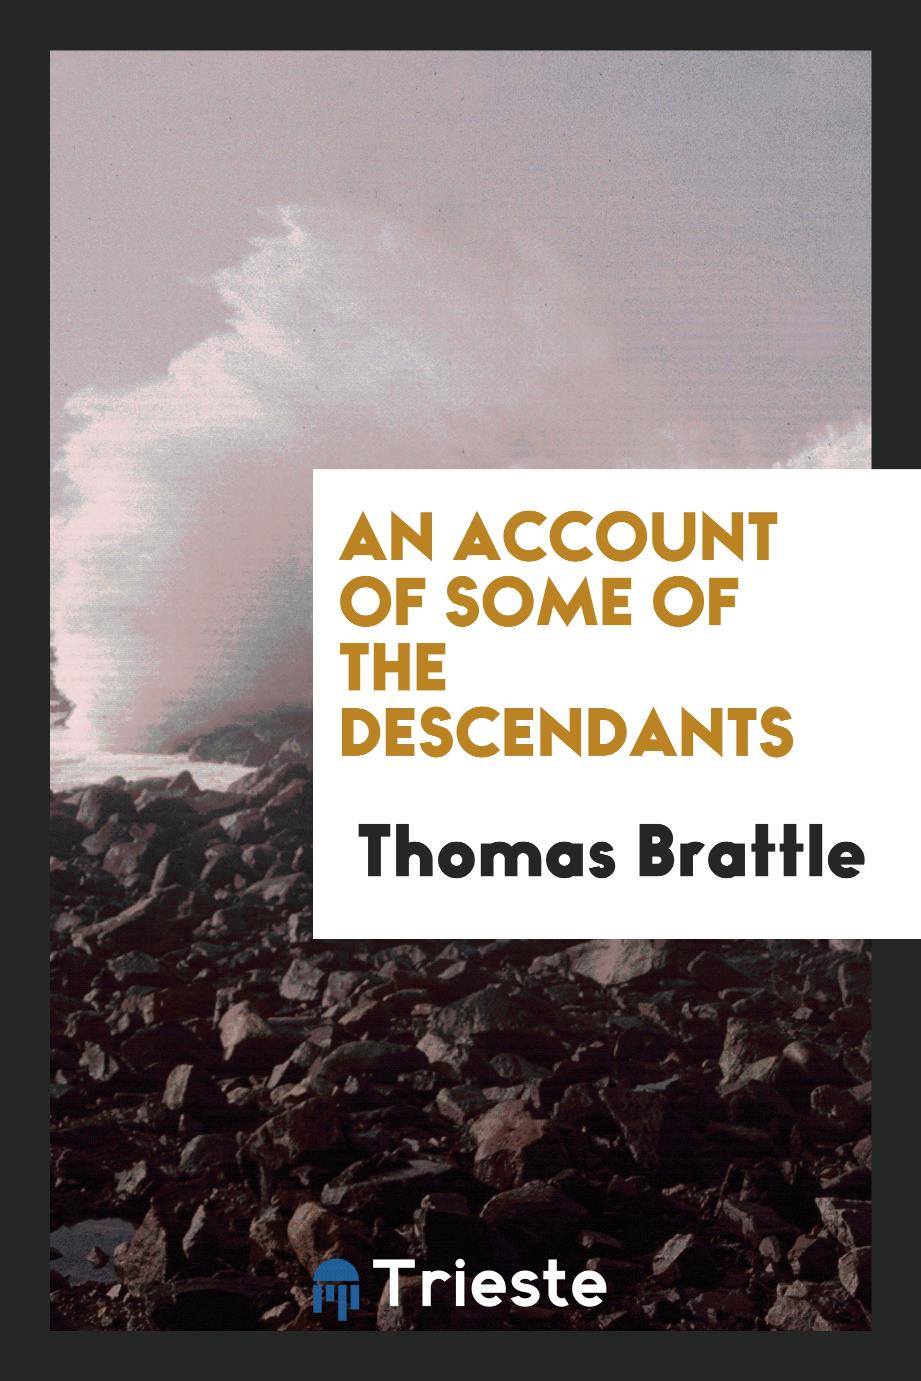 An Account of Some of the Descendants